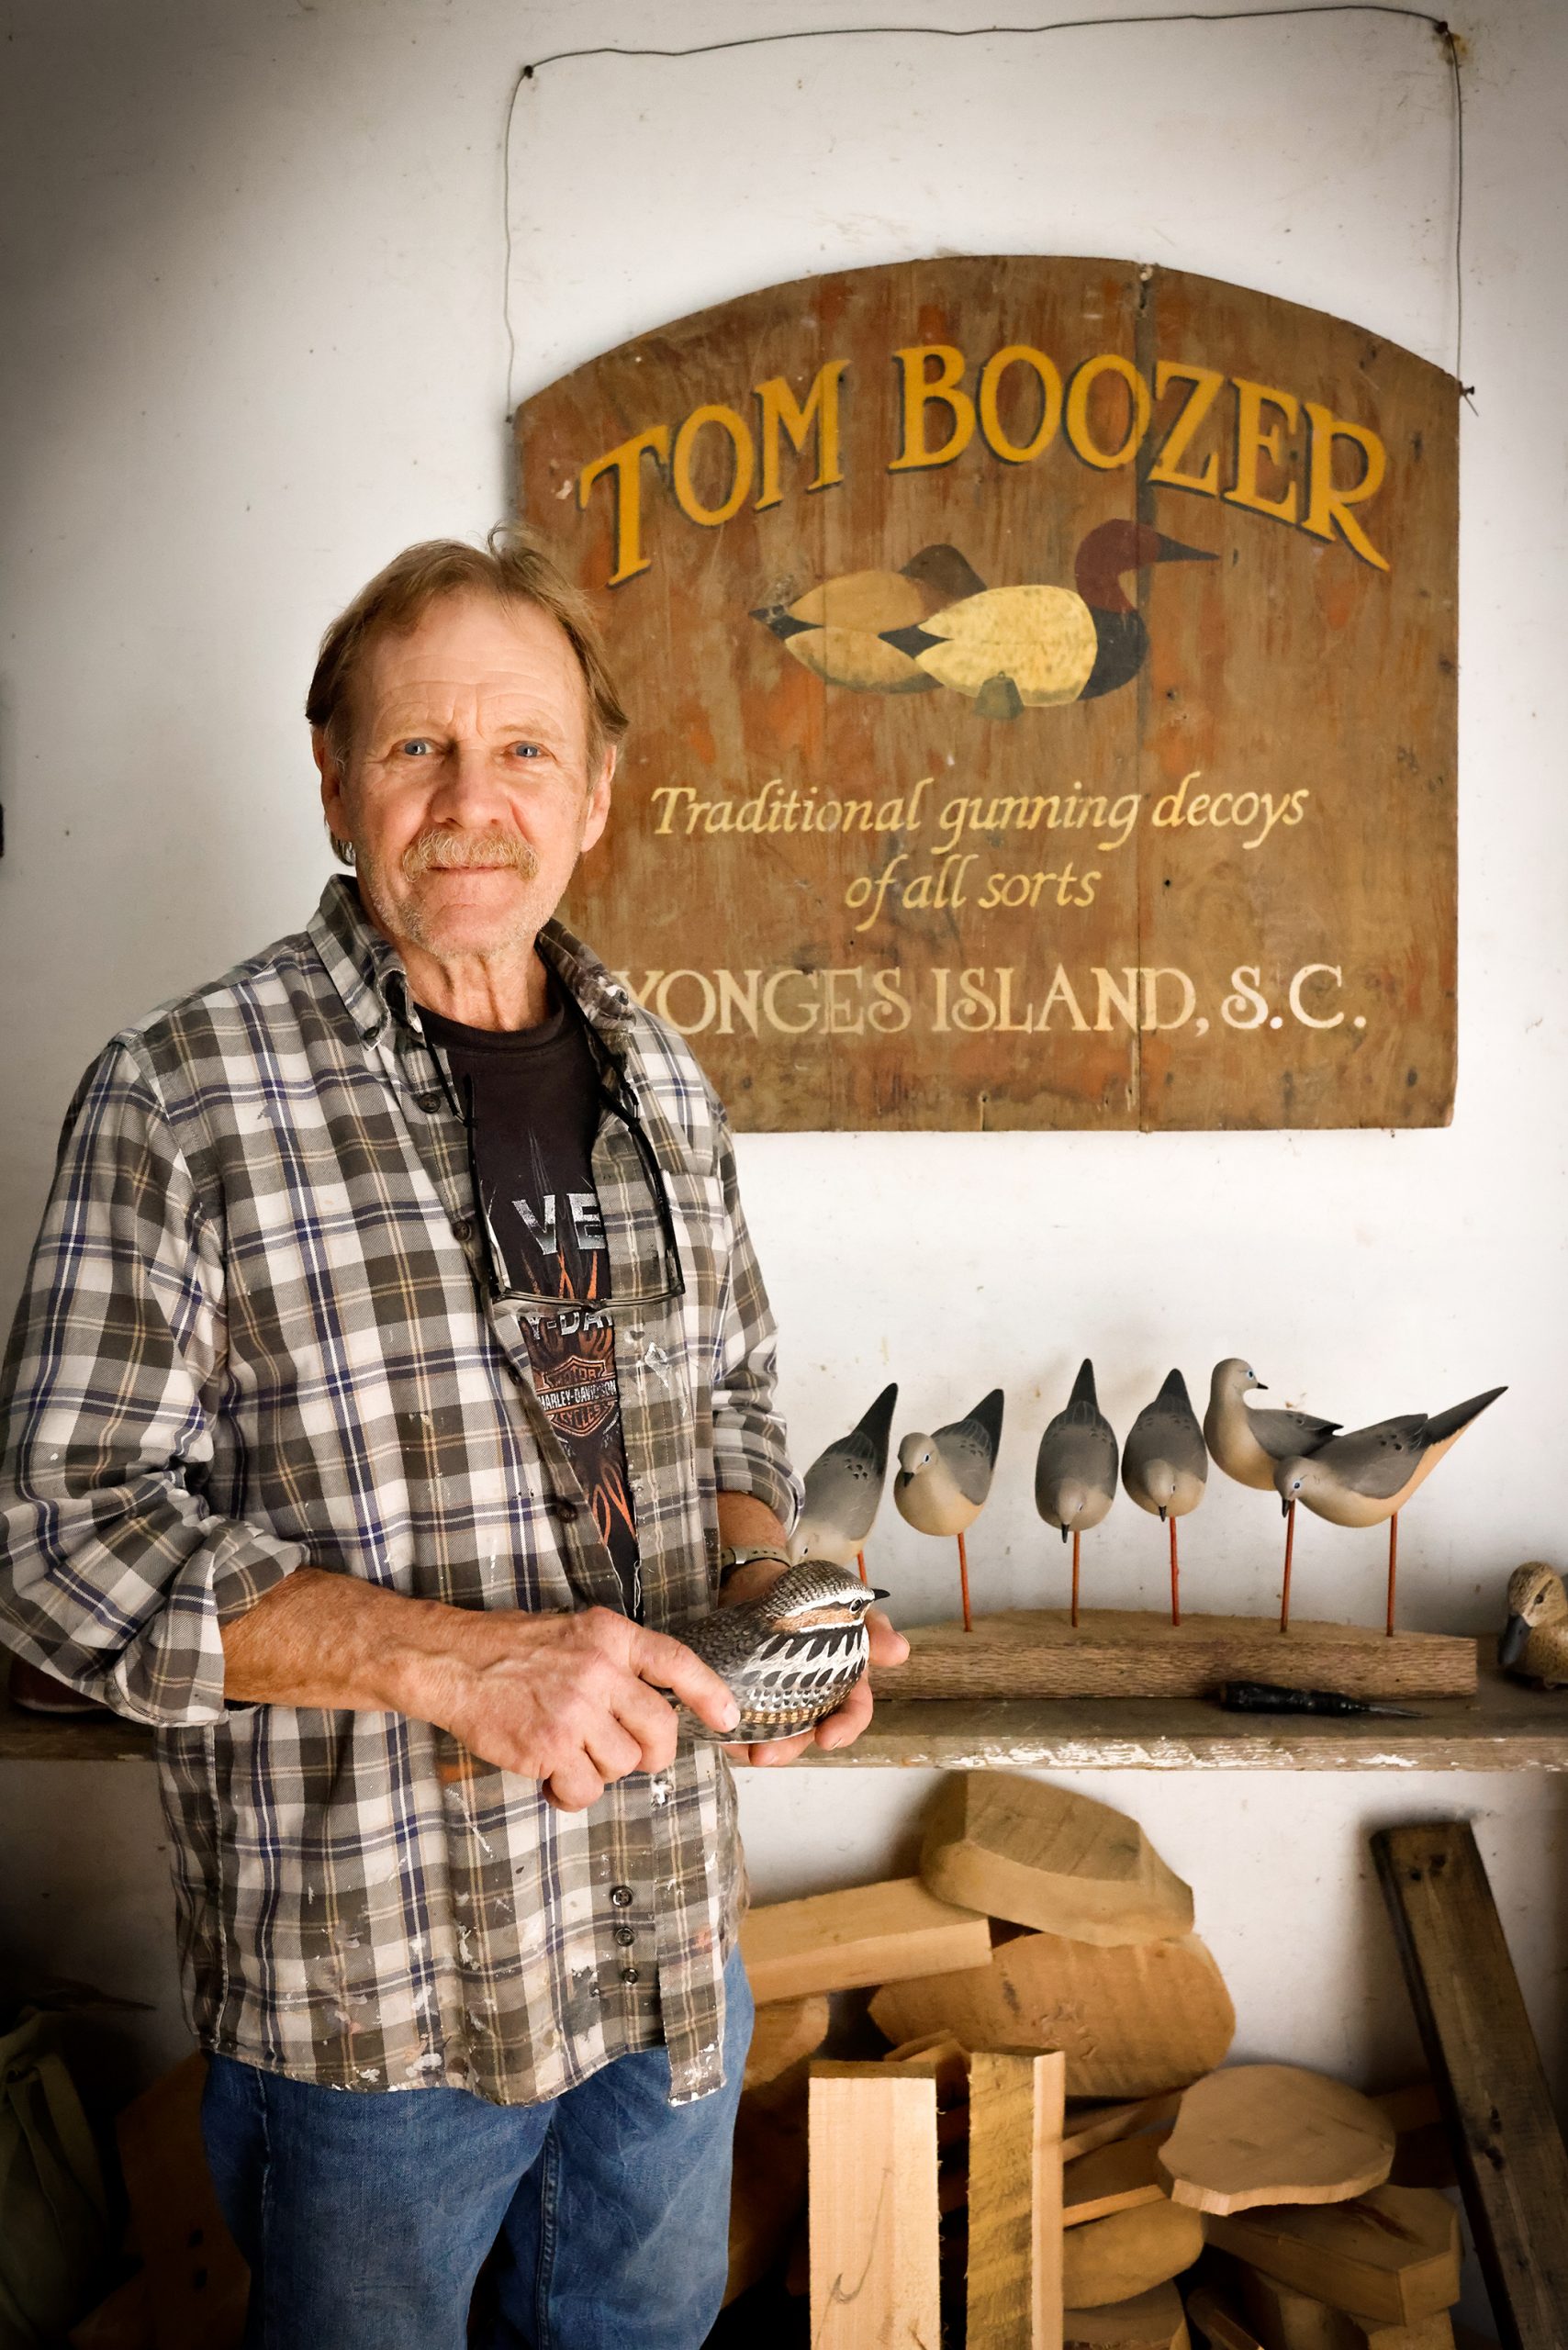 Shaking the hand of Tom Boozer, you feel the strength and depth that goes behind crafting a masterpiece. It is amazing how artistry from such power and passion create a detailed and beautiful decoy.